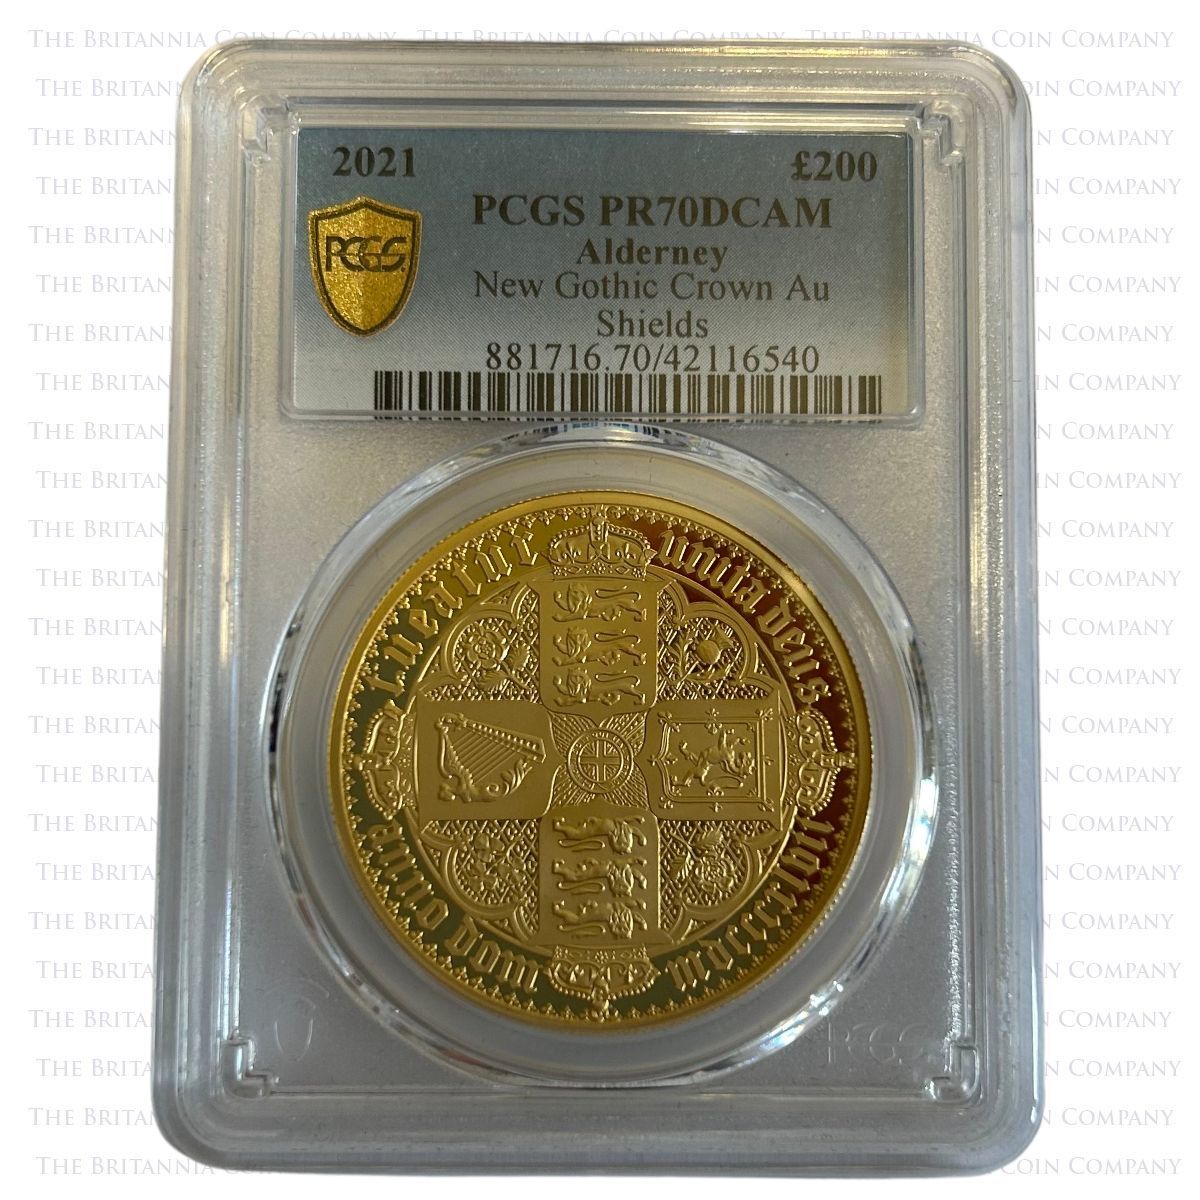 2021 Alderney New Gothic Crown Cruciform Shields Two Ounce Gold Proof Coin PCGS Graded PR70DCAM Holder